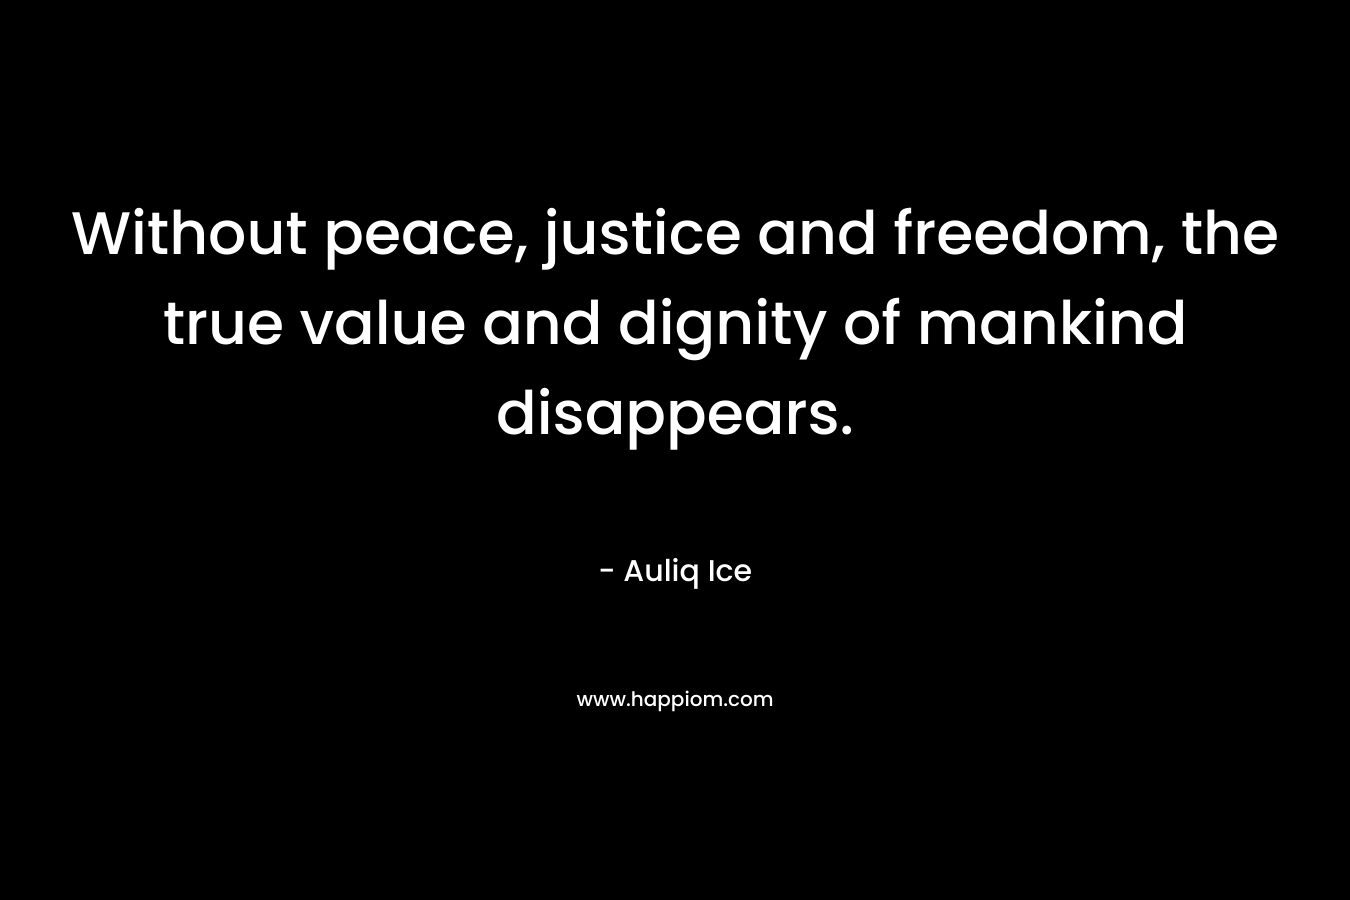 Without peace, justice and freedom, the true value and dignity of mankind disappears. – Auliq Ice